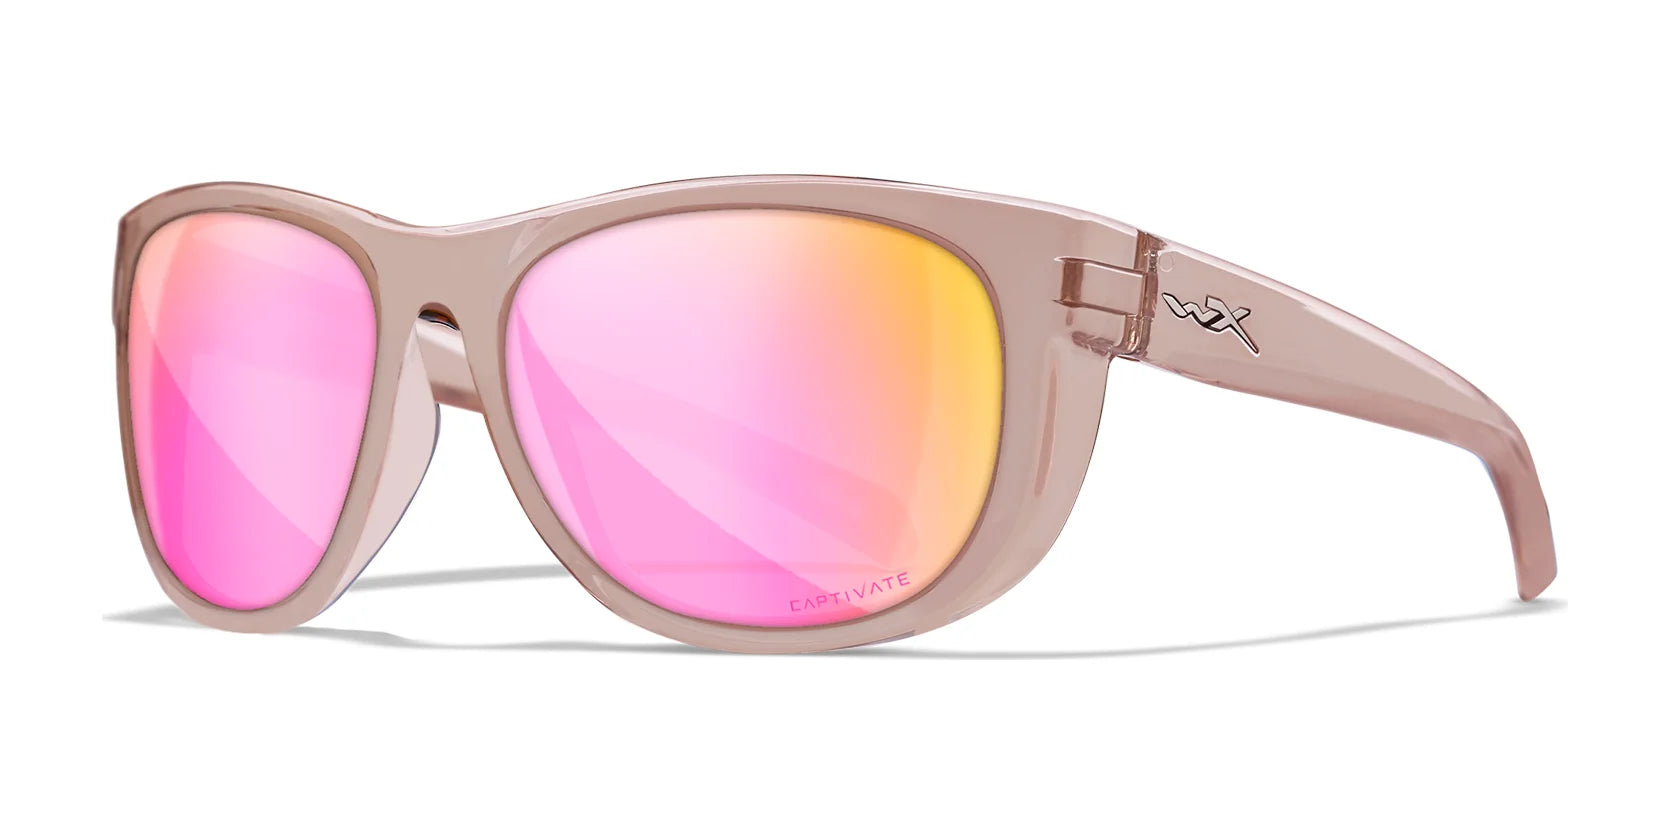 Wiley X WEEKENDER Sunglasses Crystal Blush / CAPTIVATE™ Polarized Rose Gold Mirror